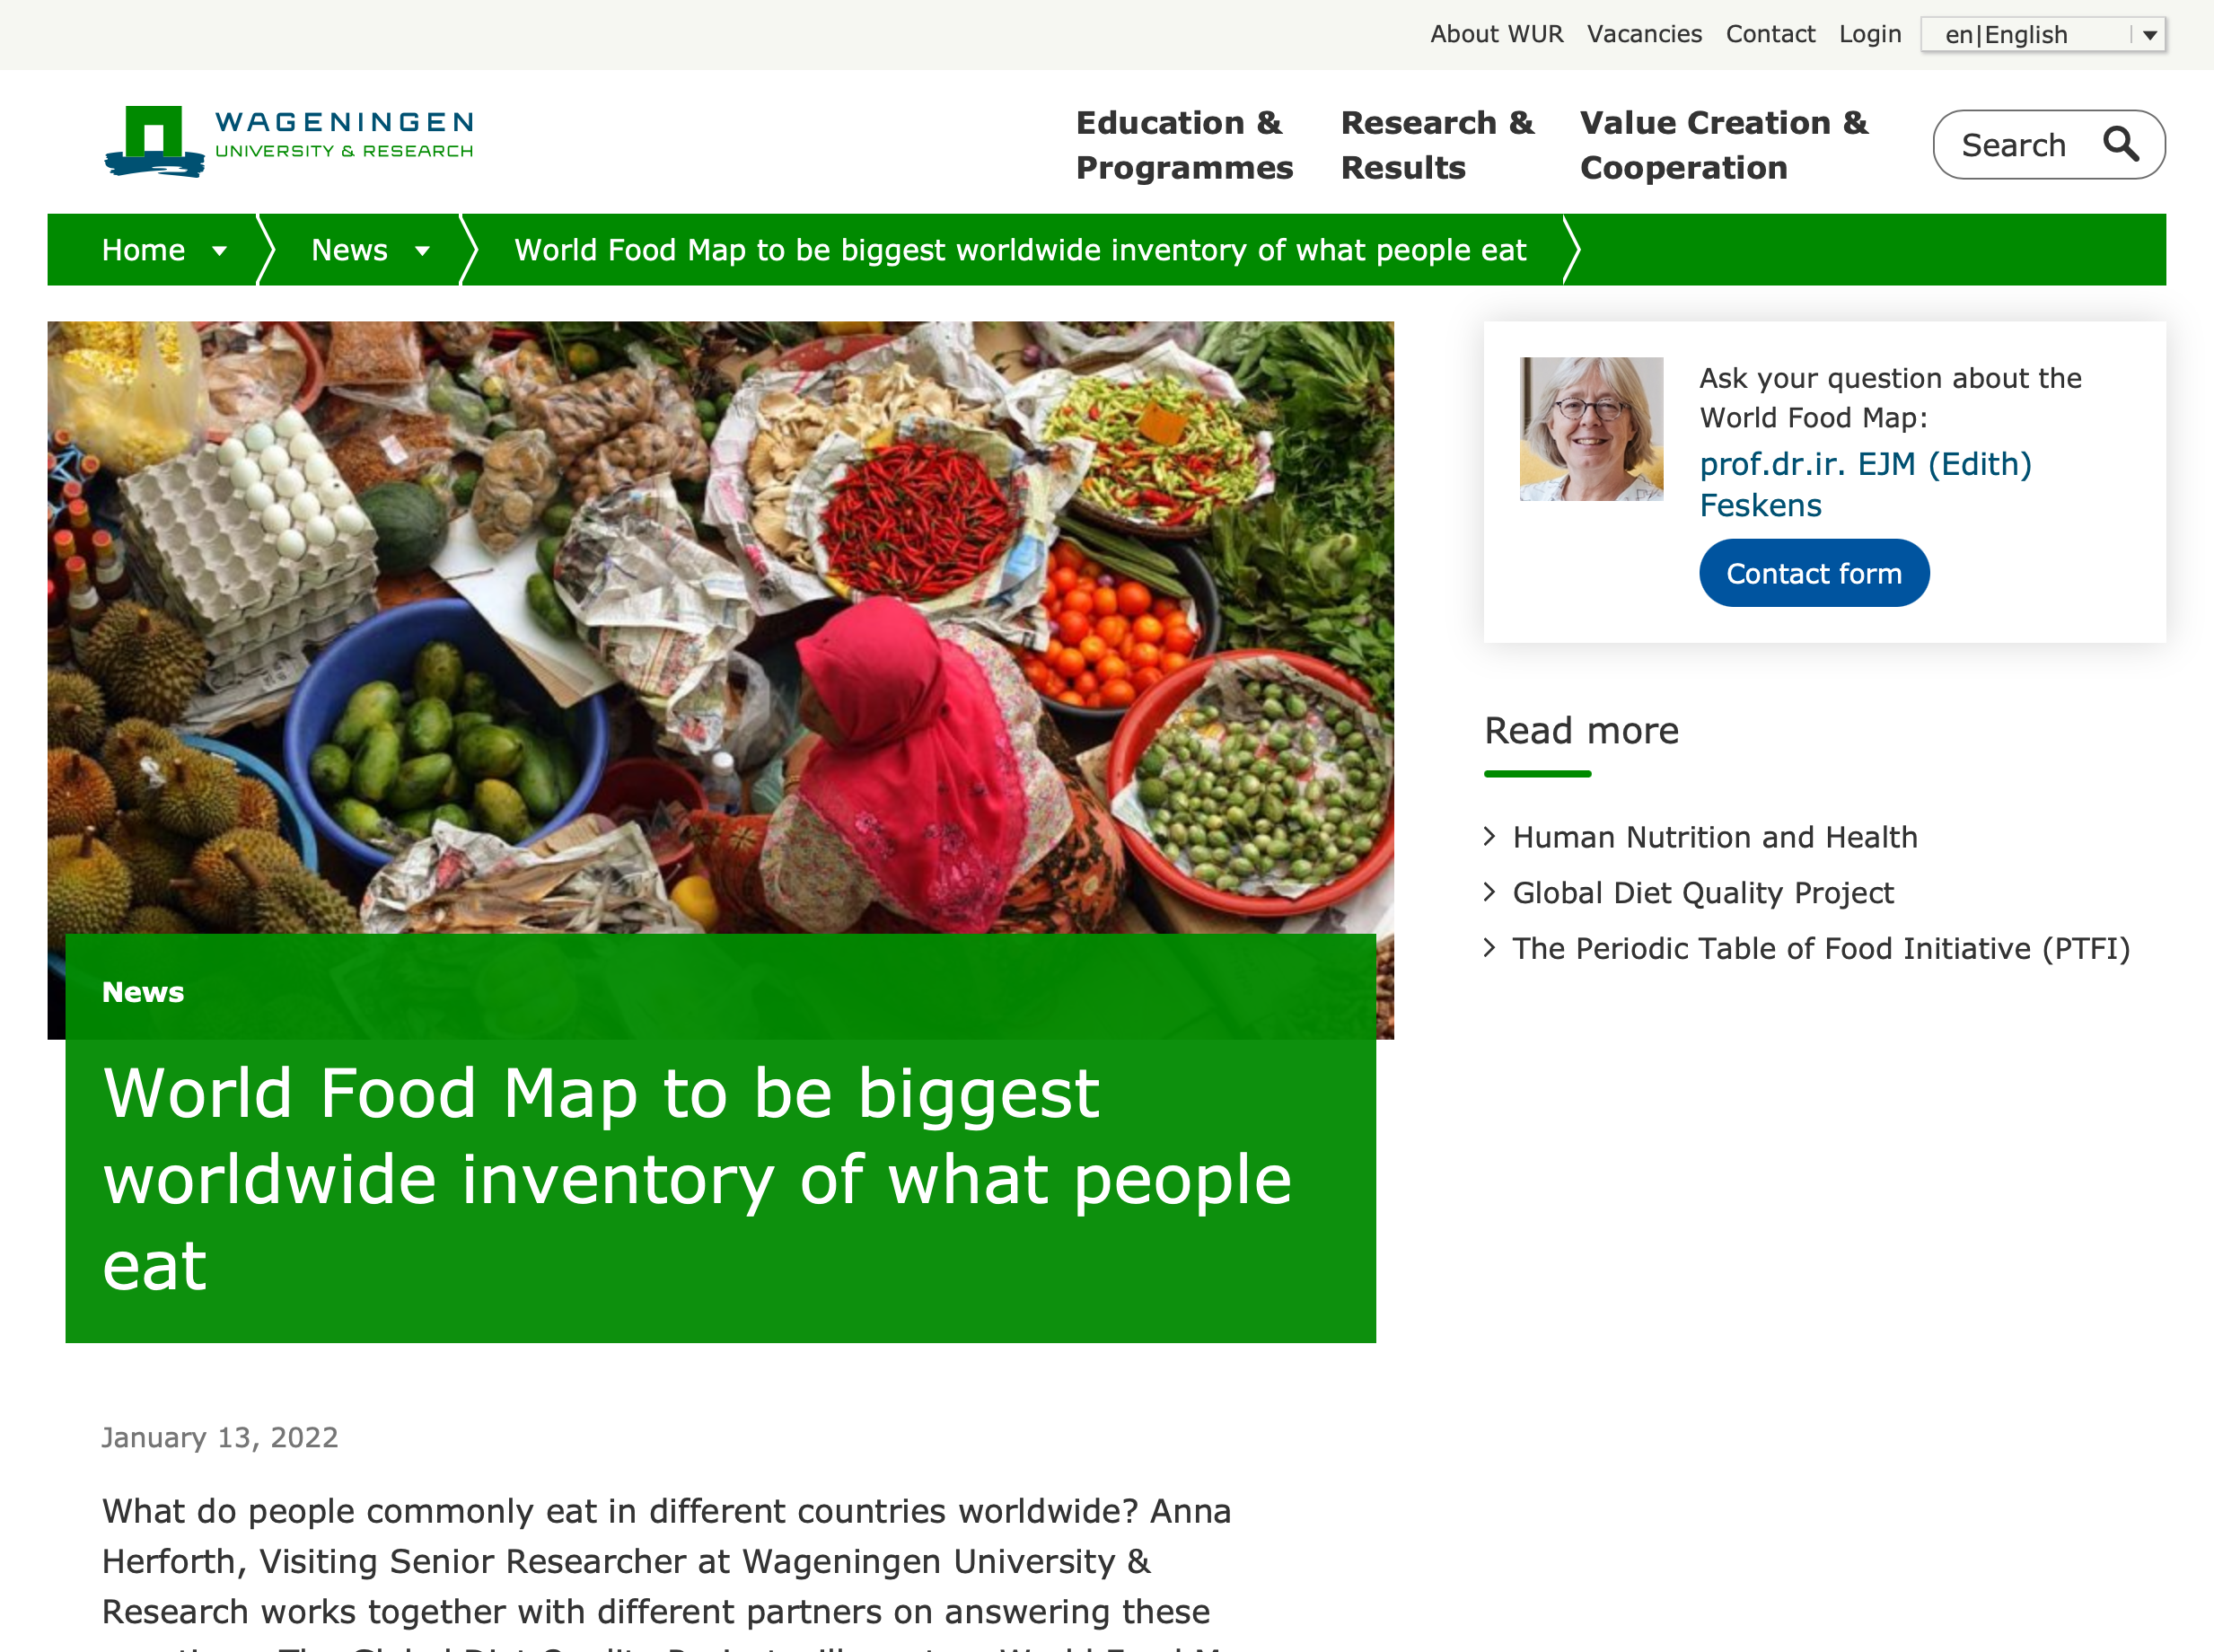 World Food Map to be Biggest Worldwide Inventory of What People Eat